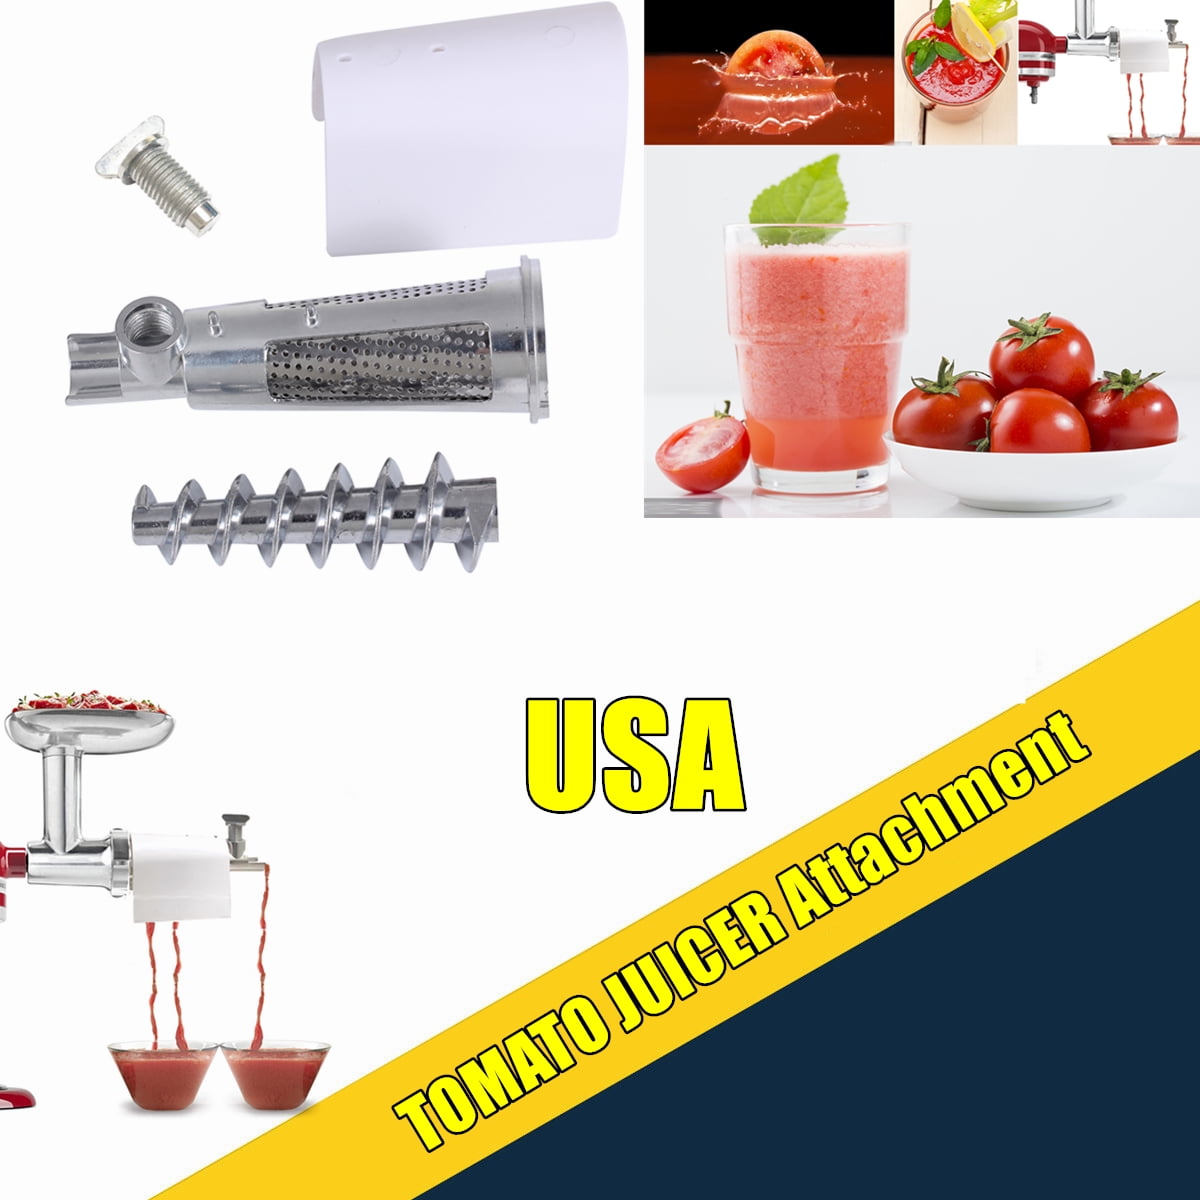 Pissente iSH09-M494082mn Blender Tomato Juicer Meat Grinder Accessories,  Food Mixer Parts, Screw Shaft Filter Sleeve Baffle Accessories for Mixer  Attach